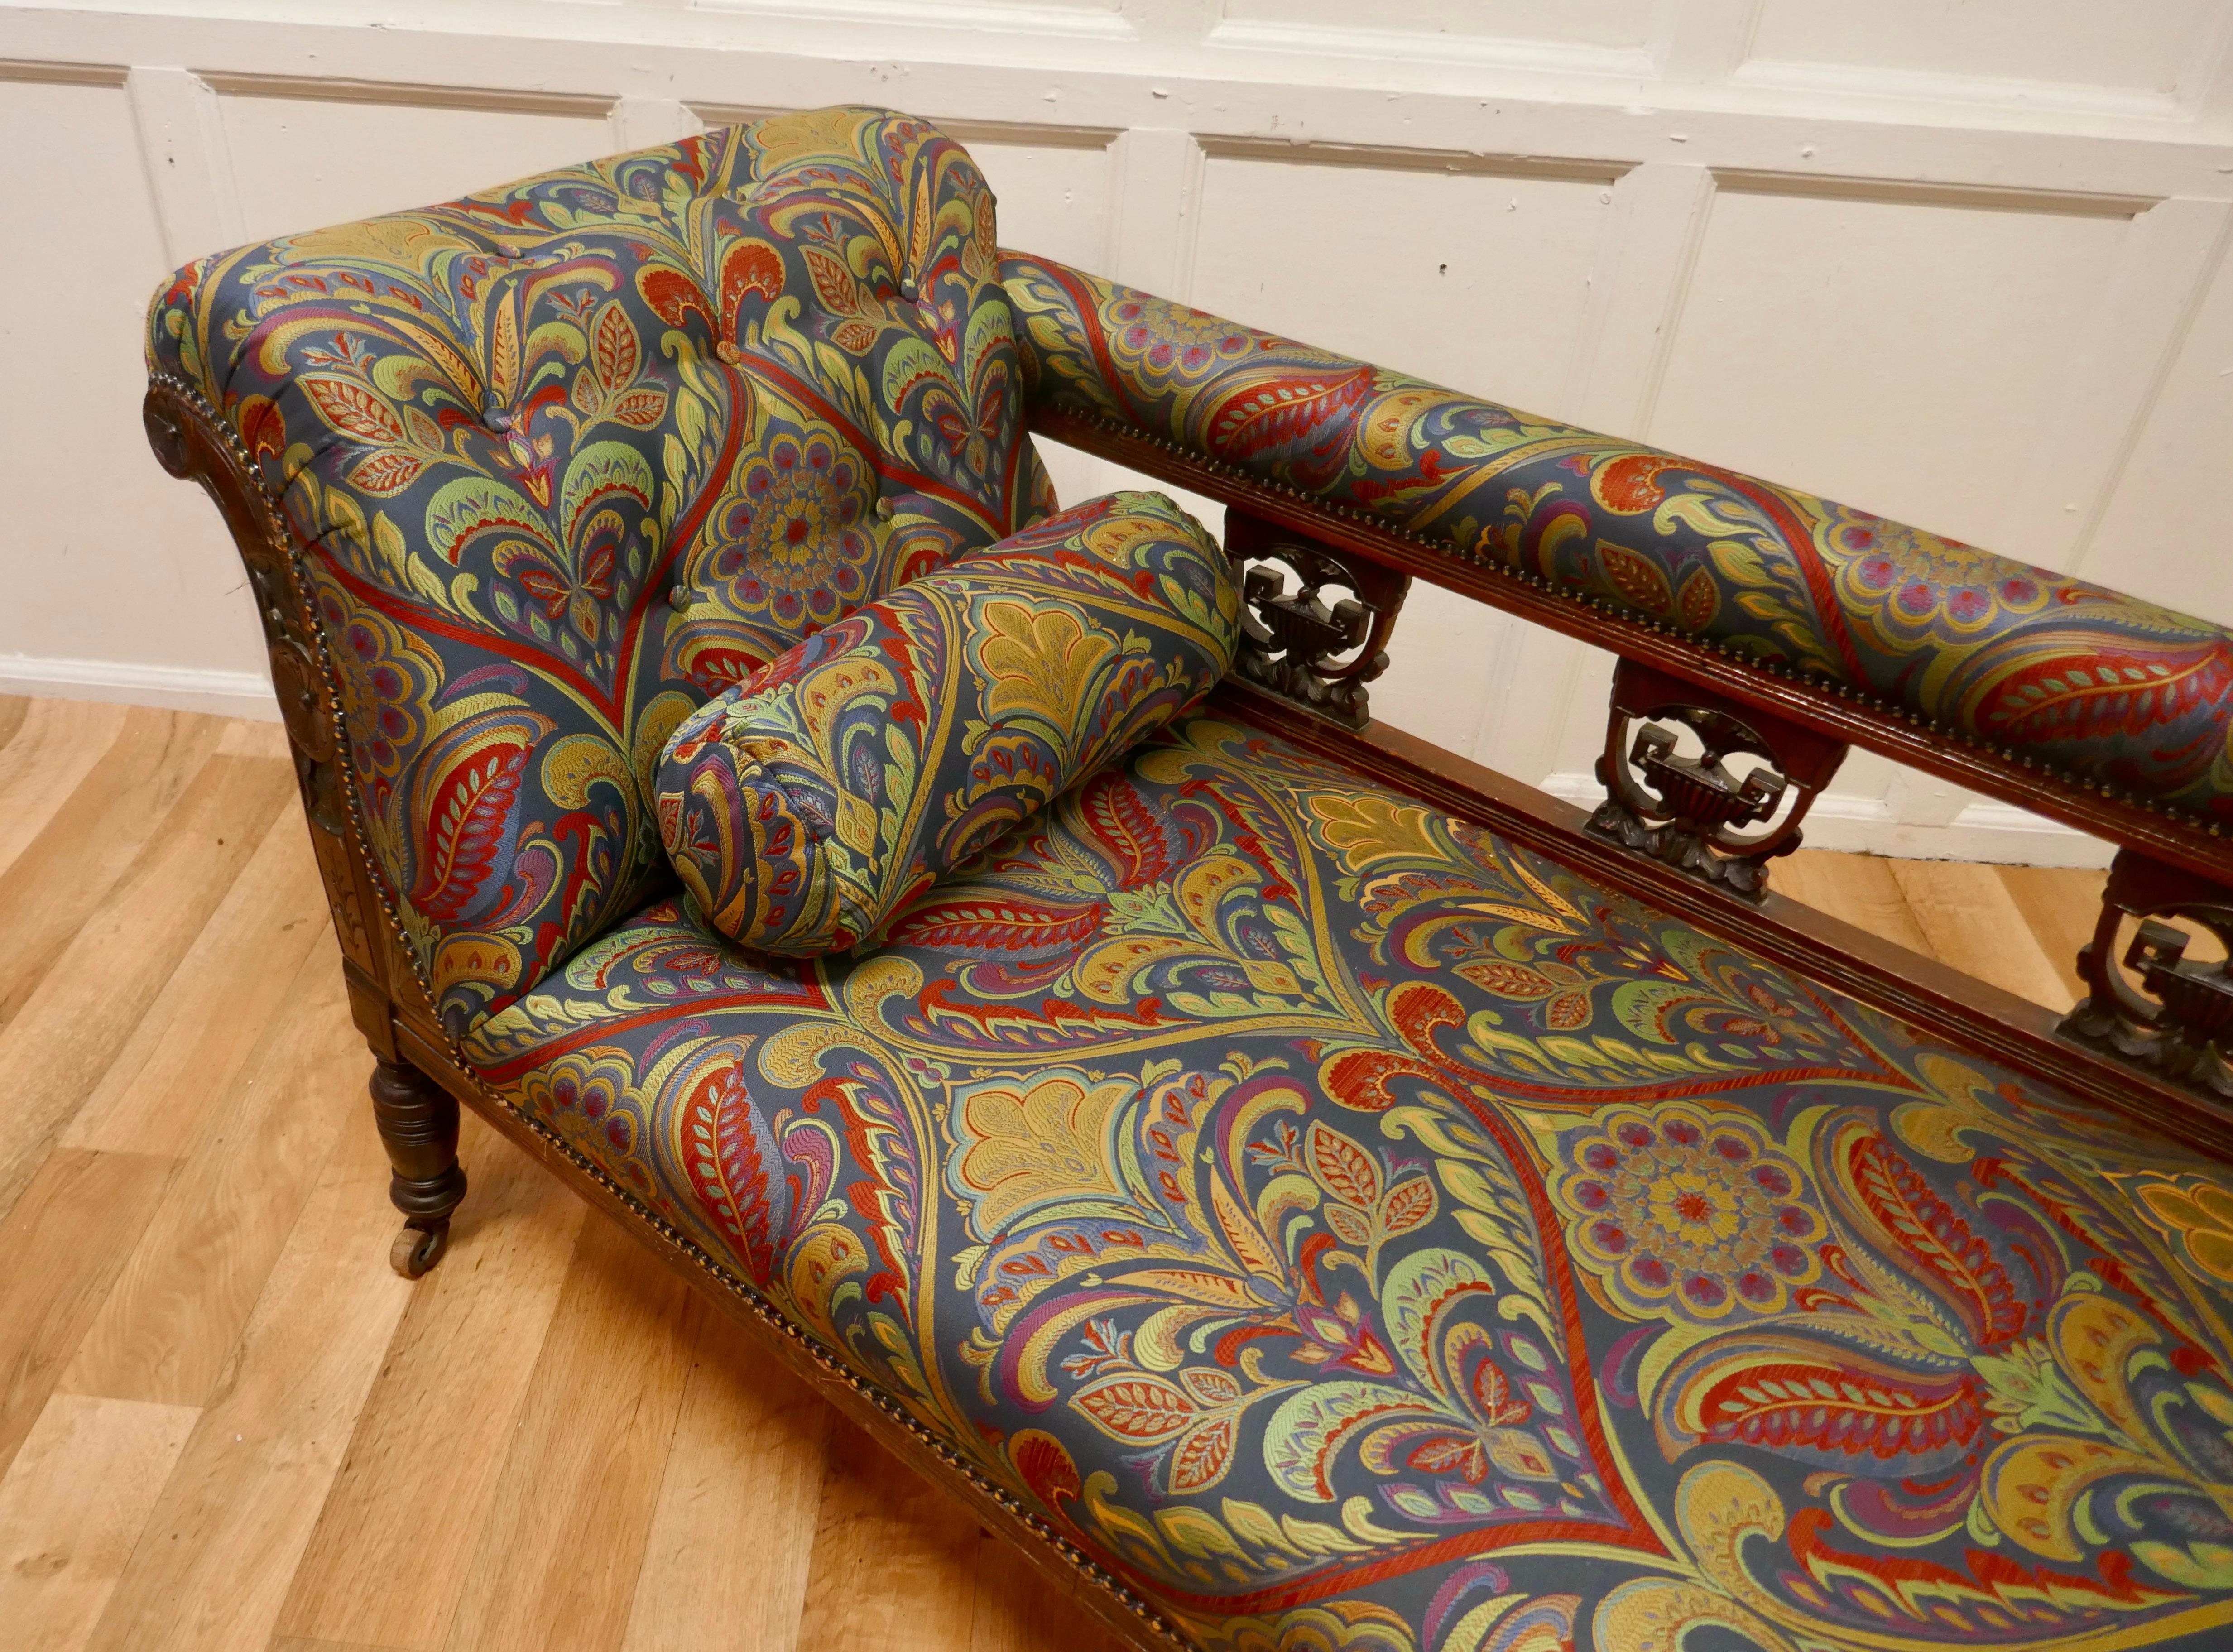 Victorian Art Nouveau Upholstered Chaise Longue In Good Condition For Sale In Chillerton, Isle of Wight